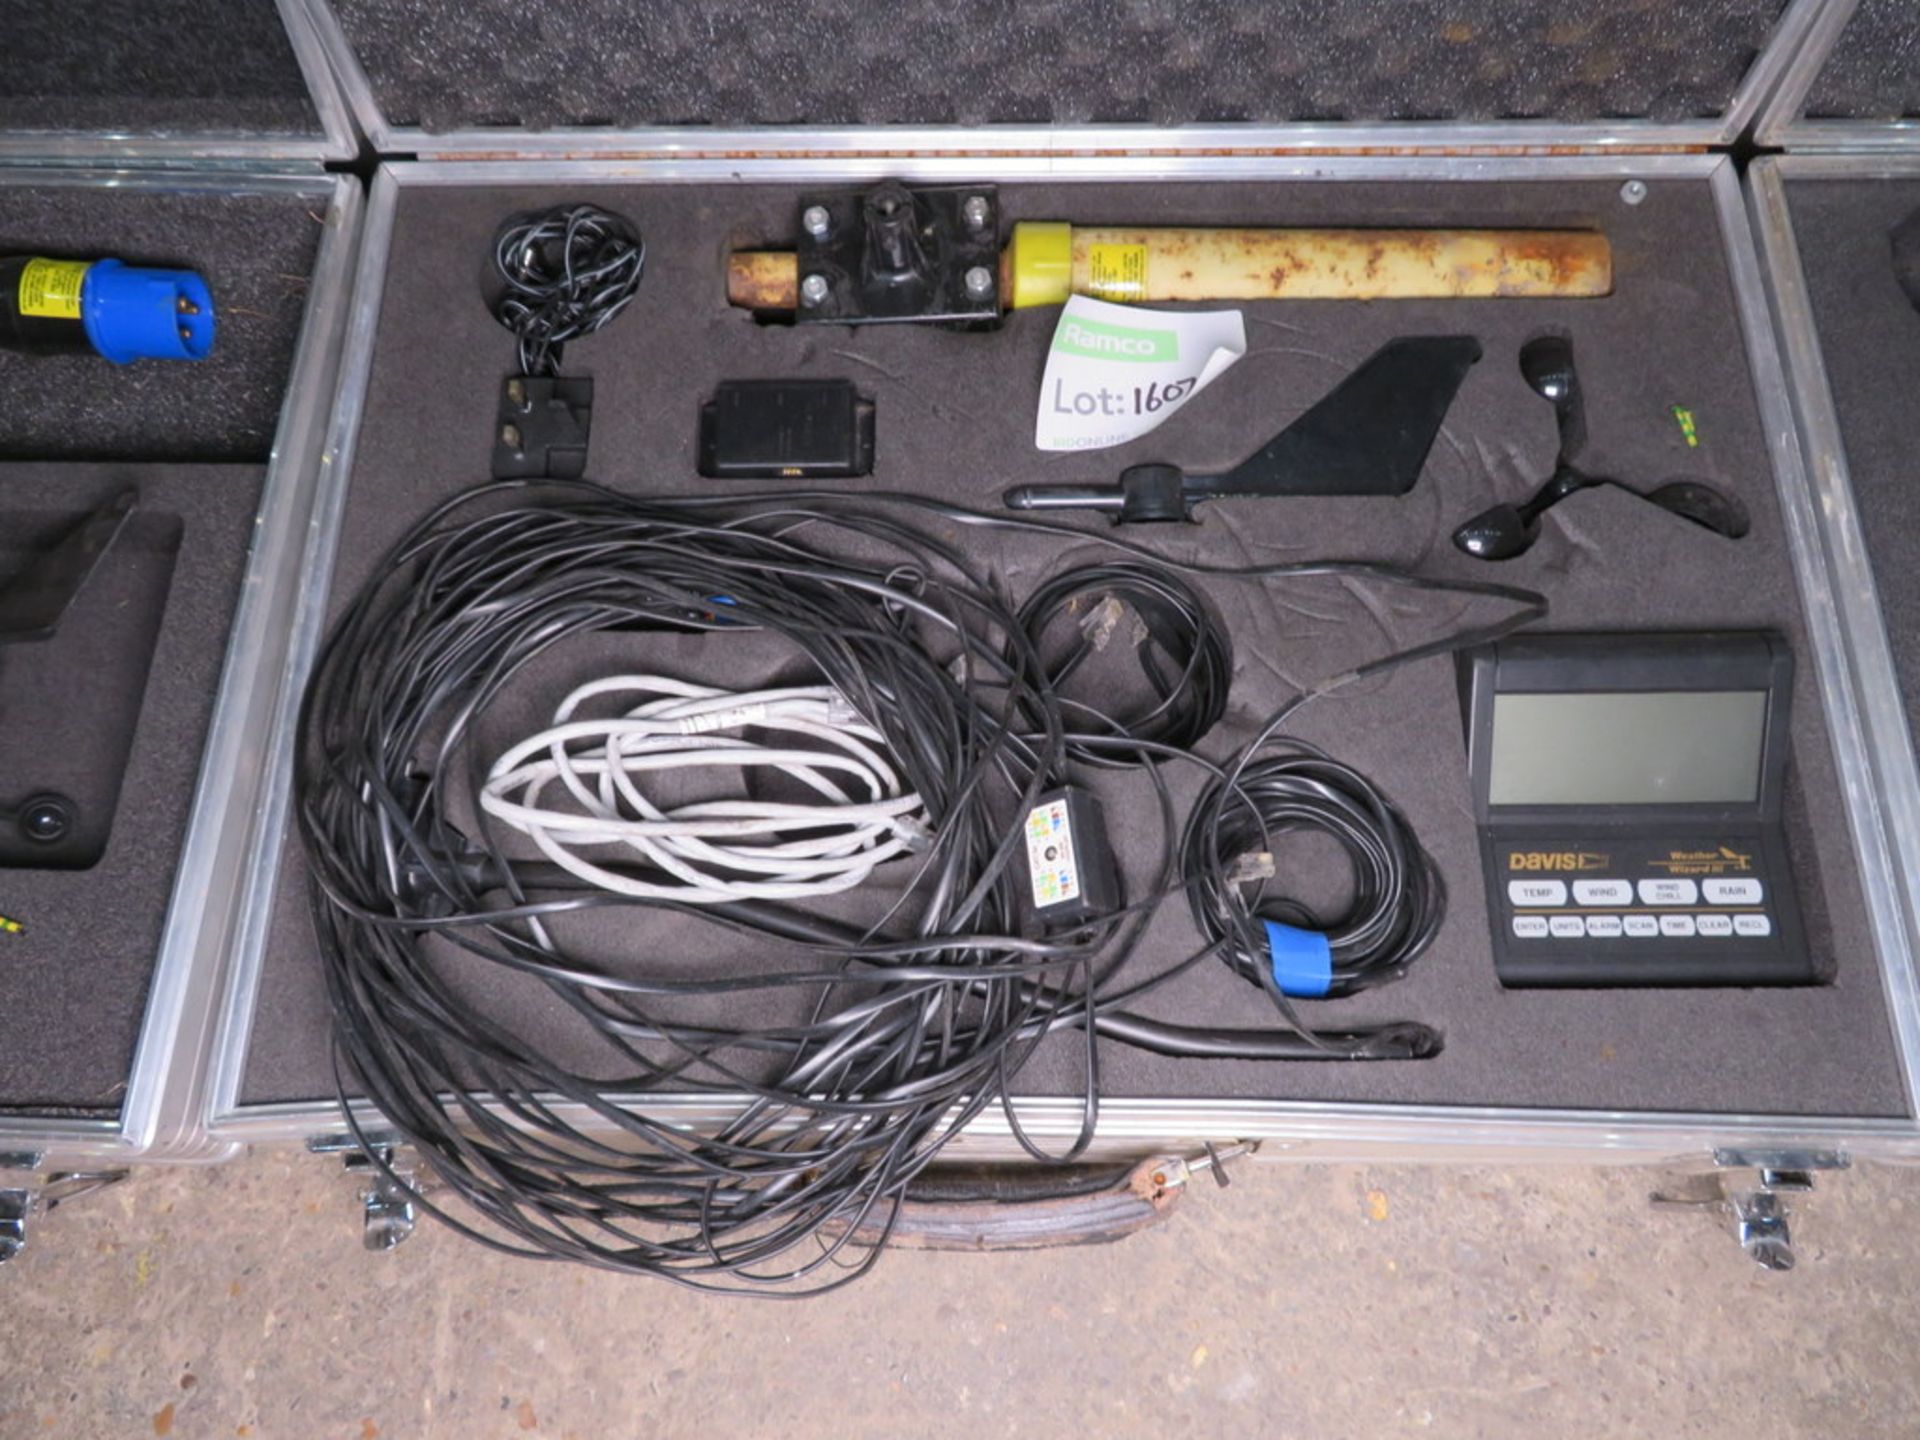 1 x Anemometer kit in case - see pictures for contents